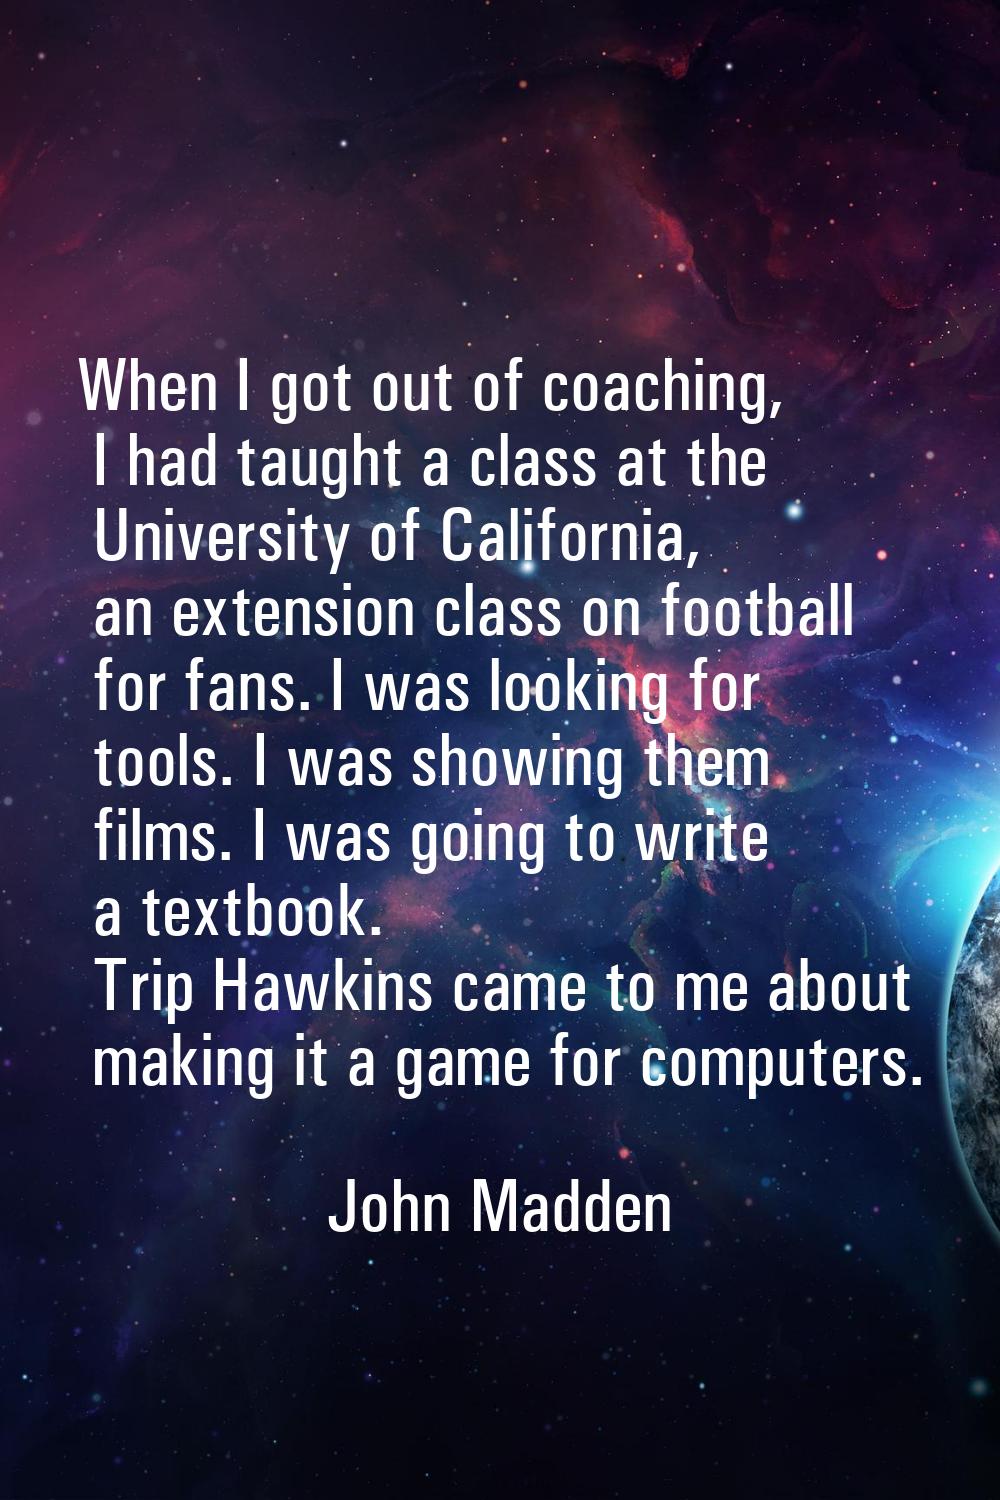 When I got out of coaching, I had taught a class at the University of California, an extension clas